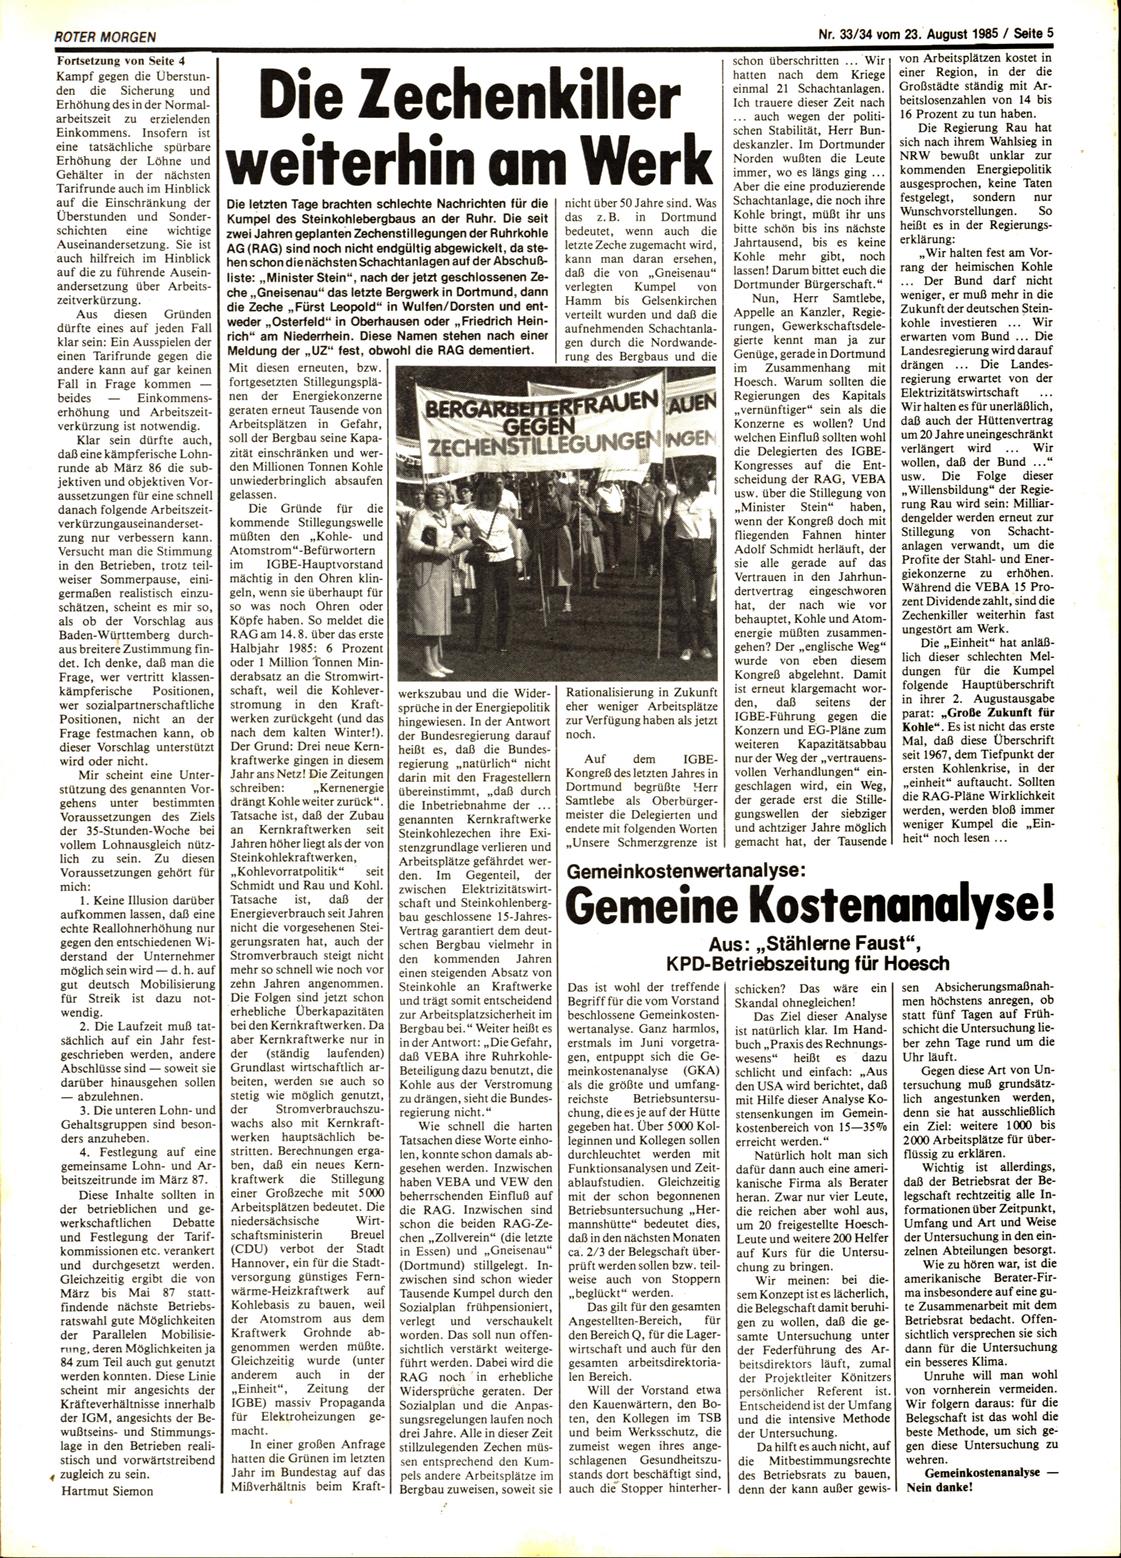 Roter Morgen, 19. Jg., 23. August 1985, Nr. 33/34, Seite 5